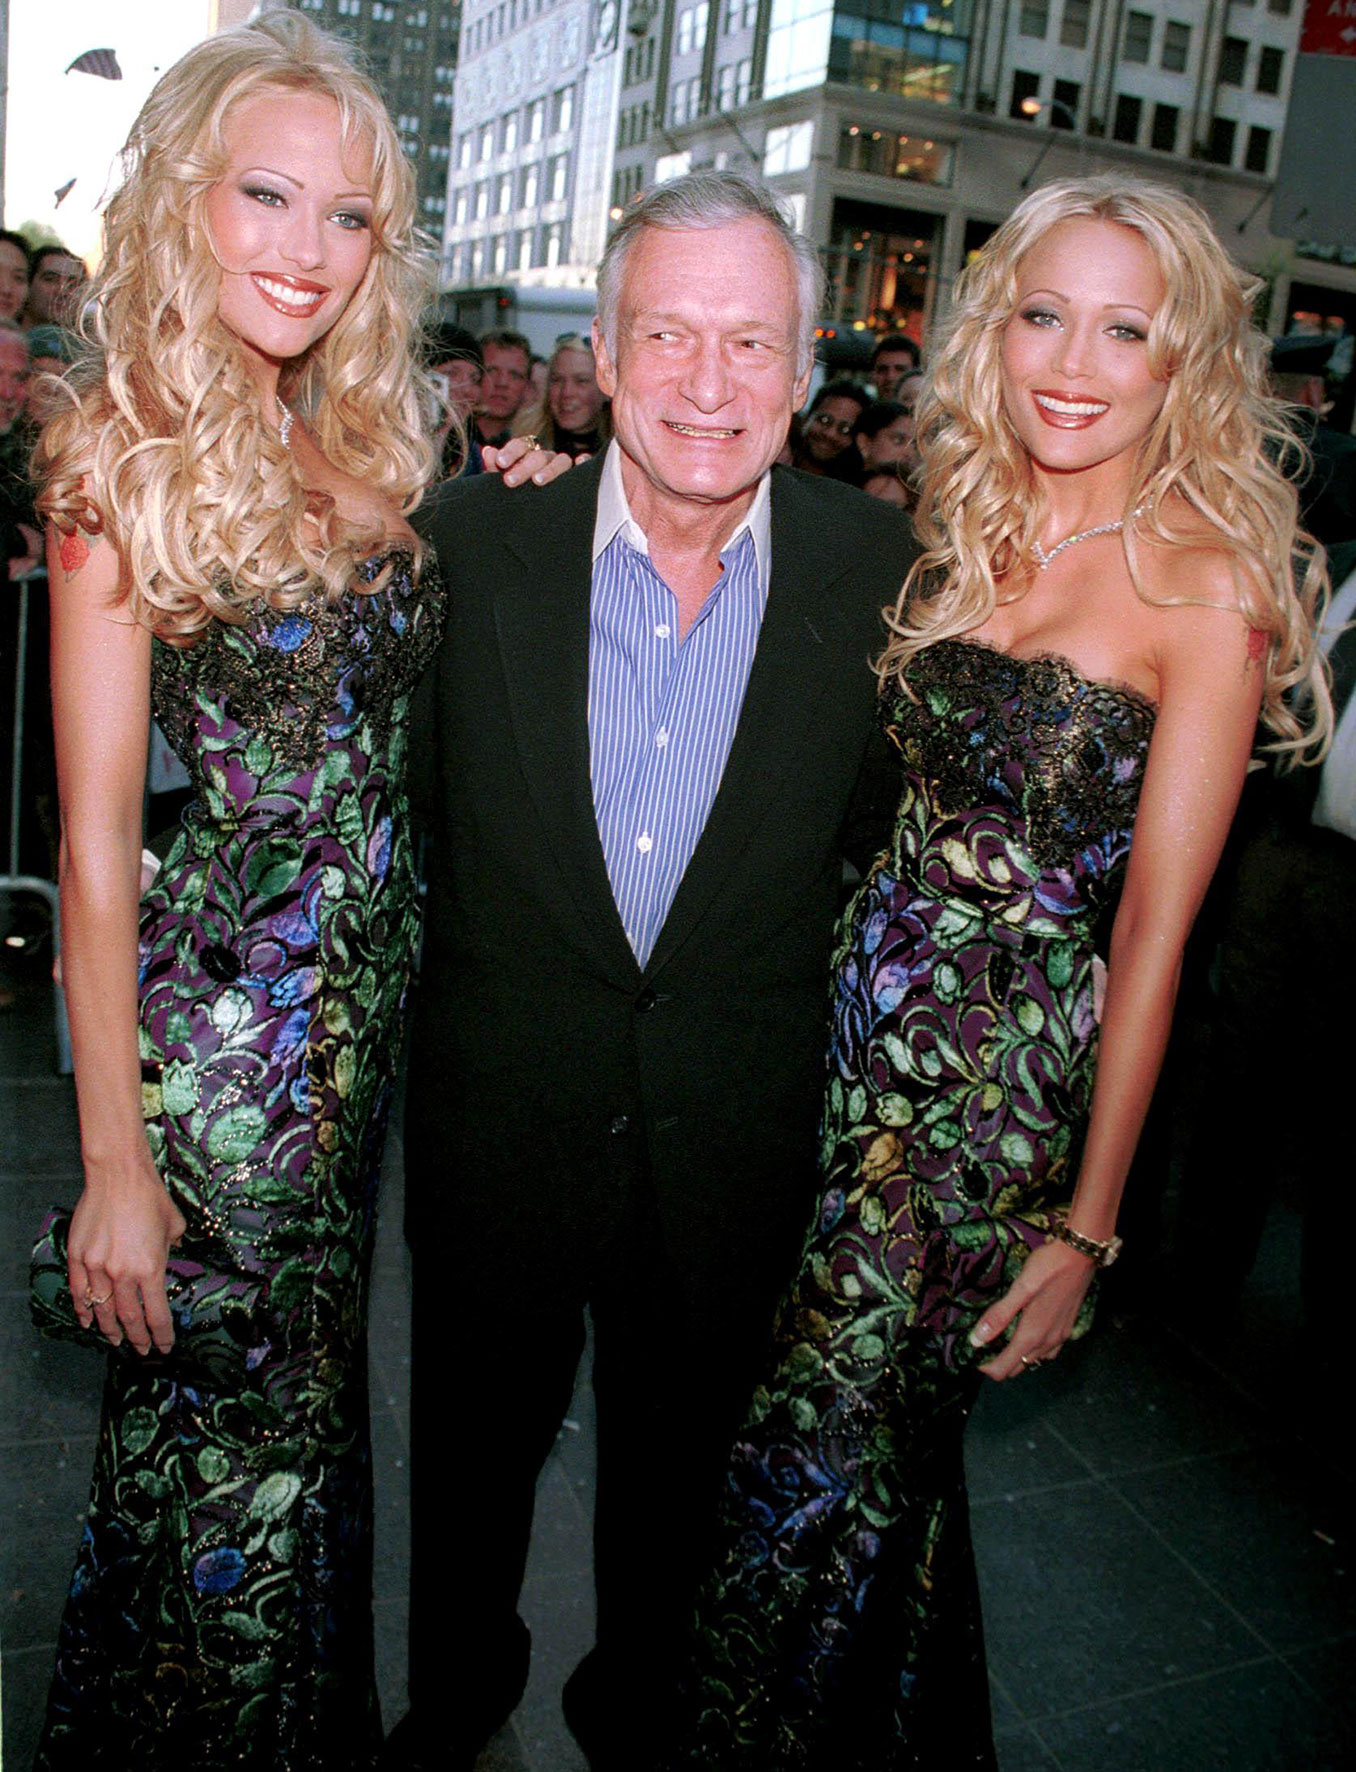 Hugh Hefners Romances His Wives and Girlfriends Through the Years Mandy and Sandy Bentley